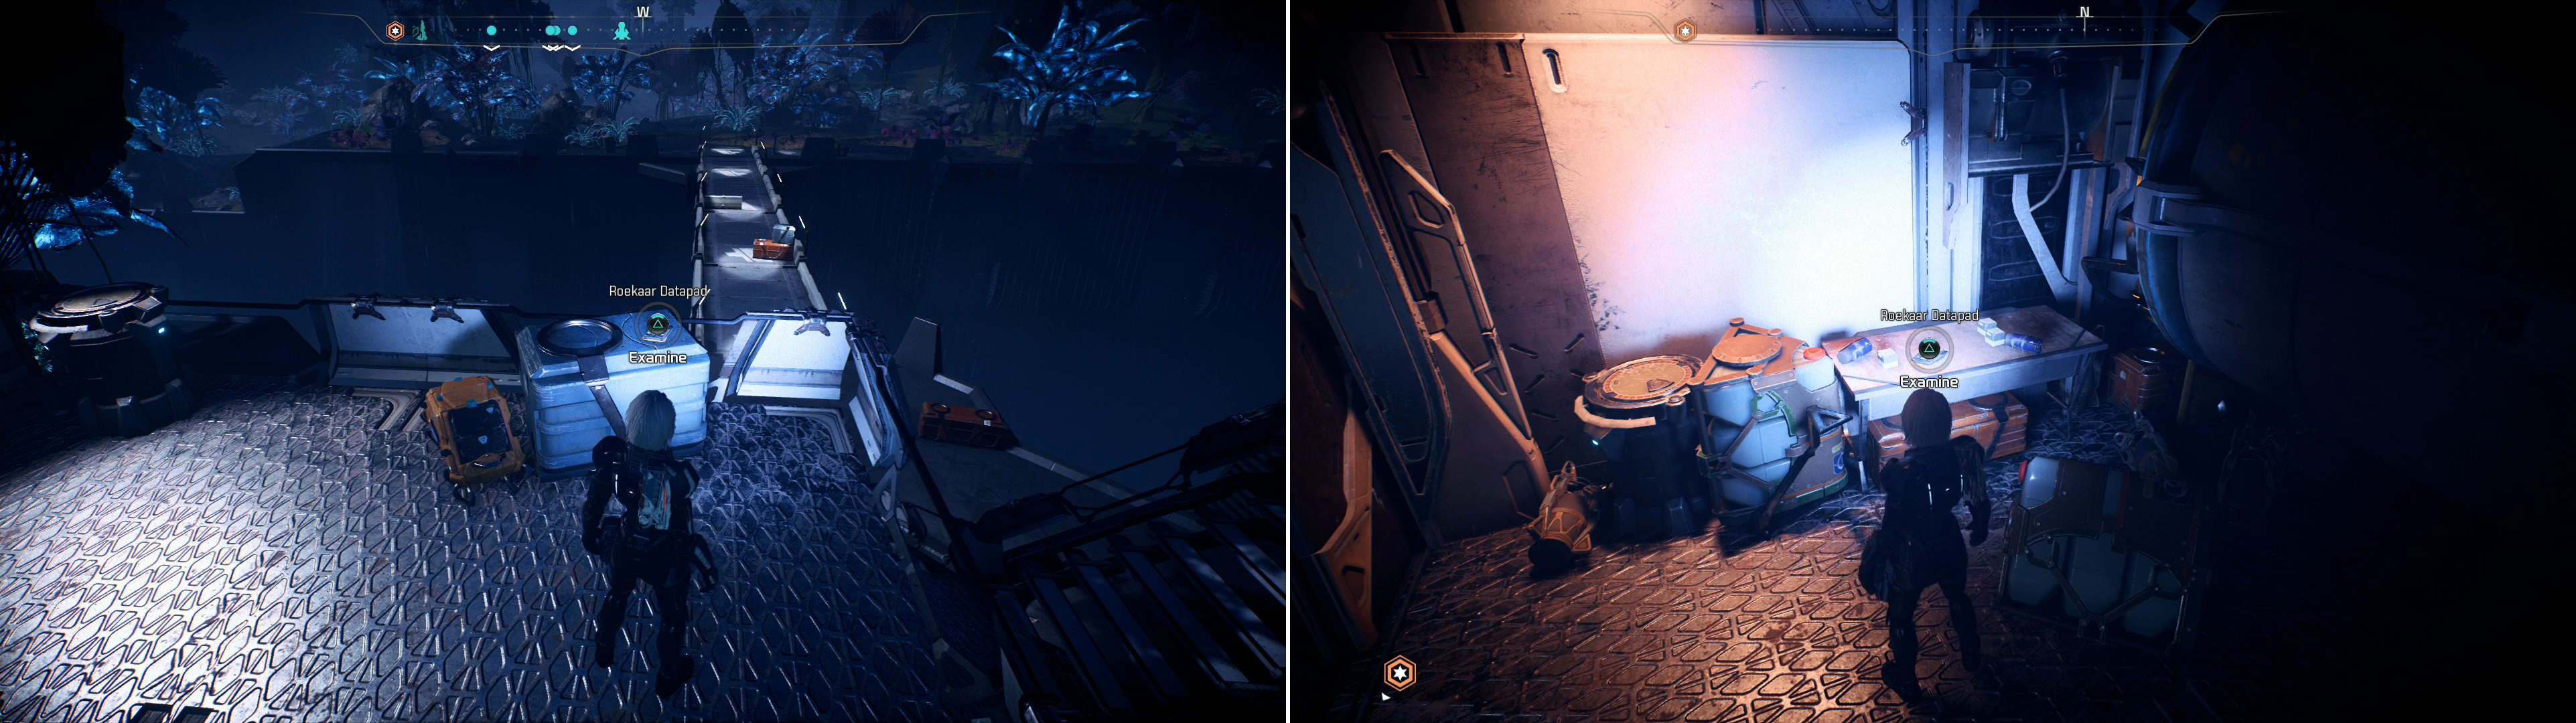 Youll find Roekaar Manifestos near the bridge across Havarls trench (left) and in the Roekaar camp along the eastern edge of the Havarl operational zone (right).